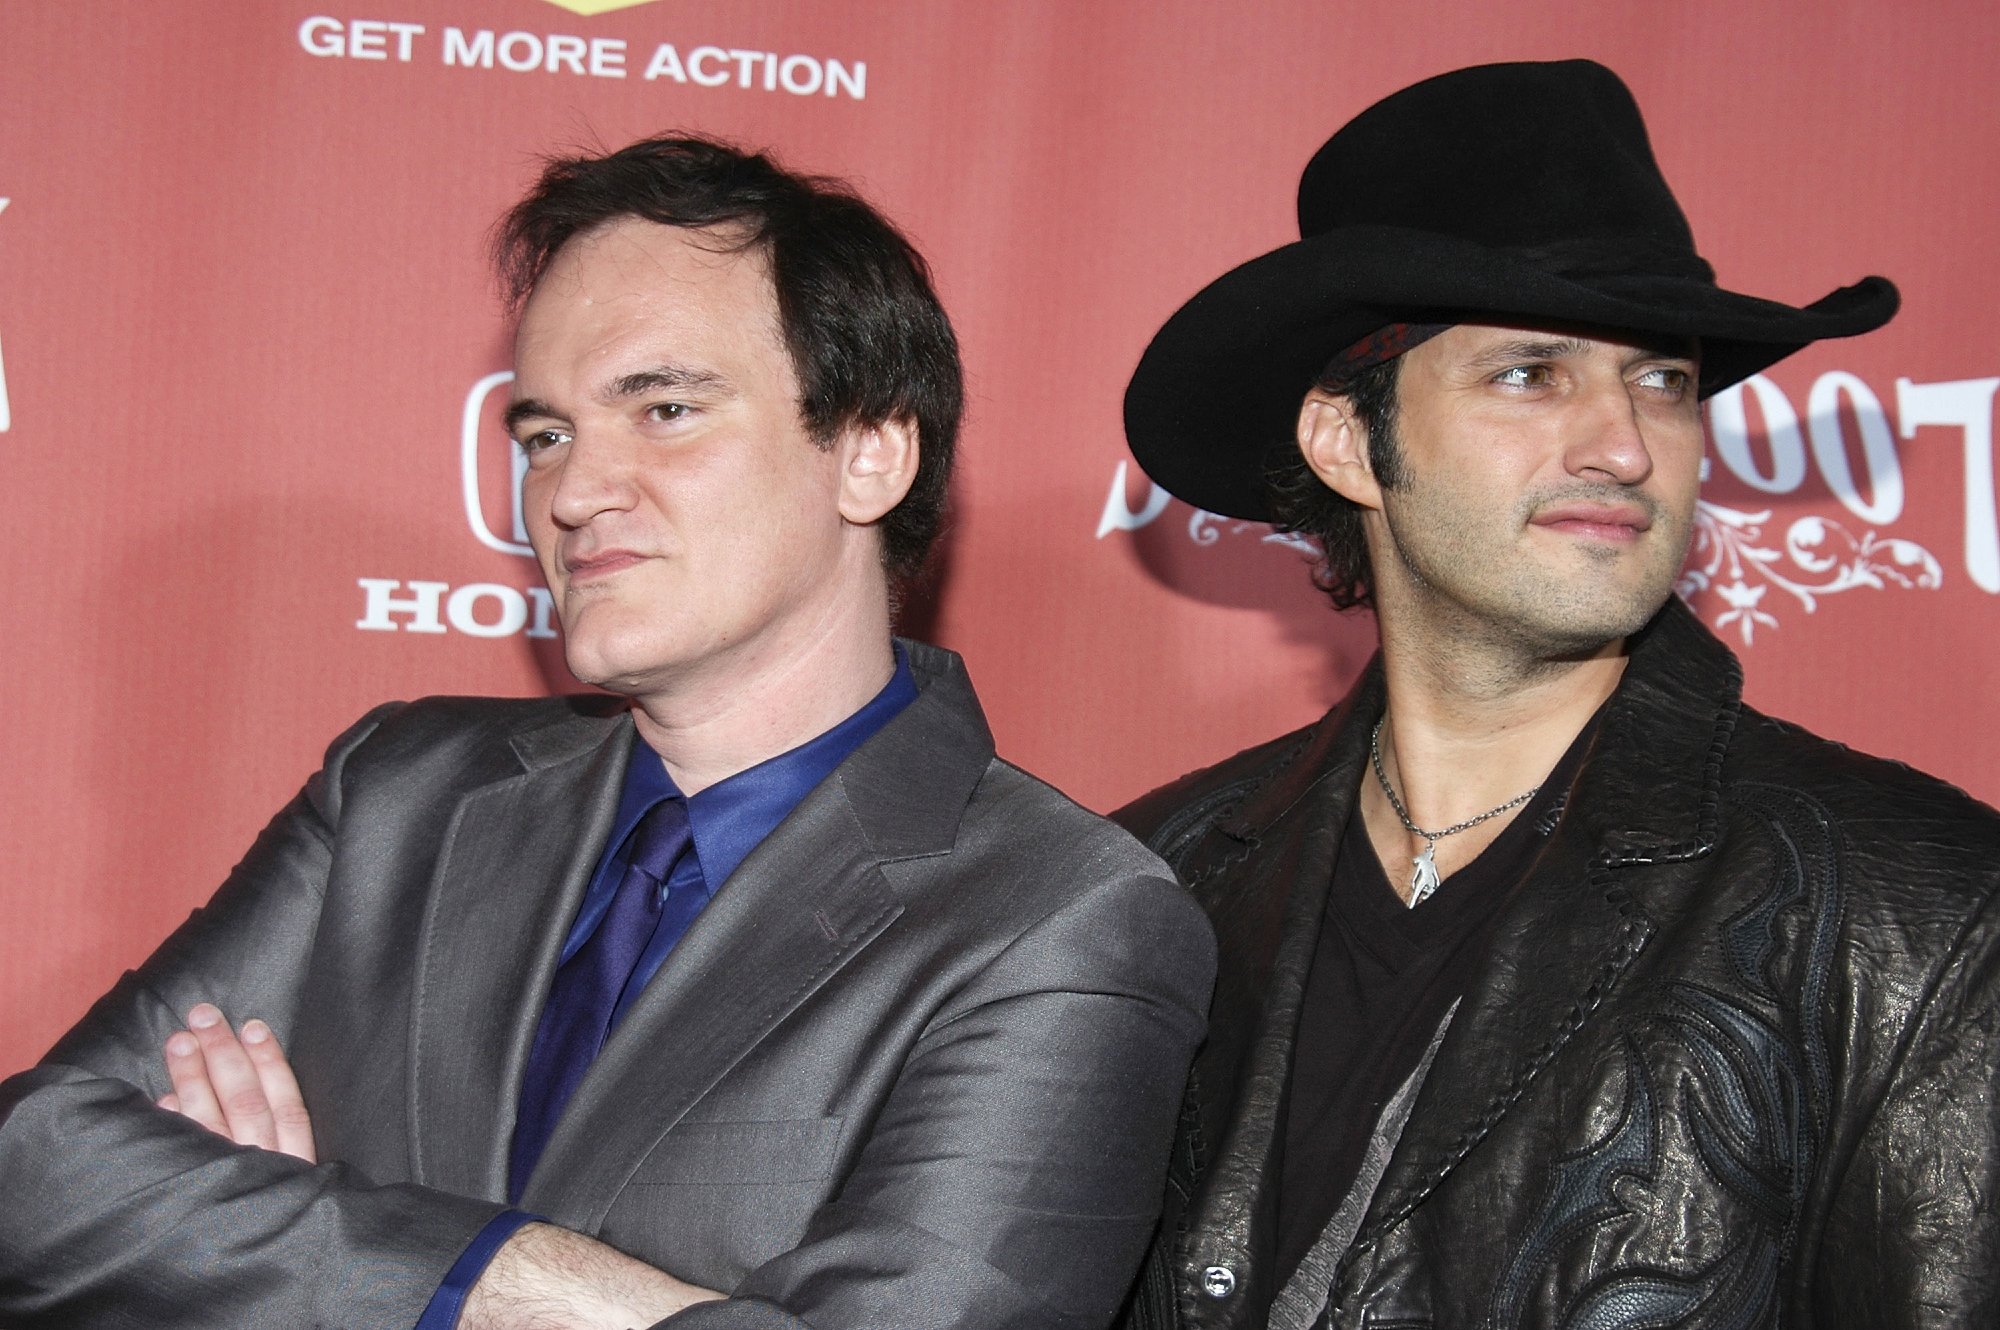 'Pulp Fiction' filmmaker Quentin Tarantino and Robert Rodriguez posing in front of a step and repeat